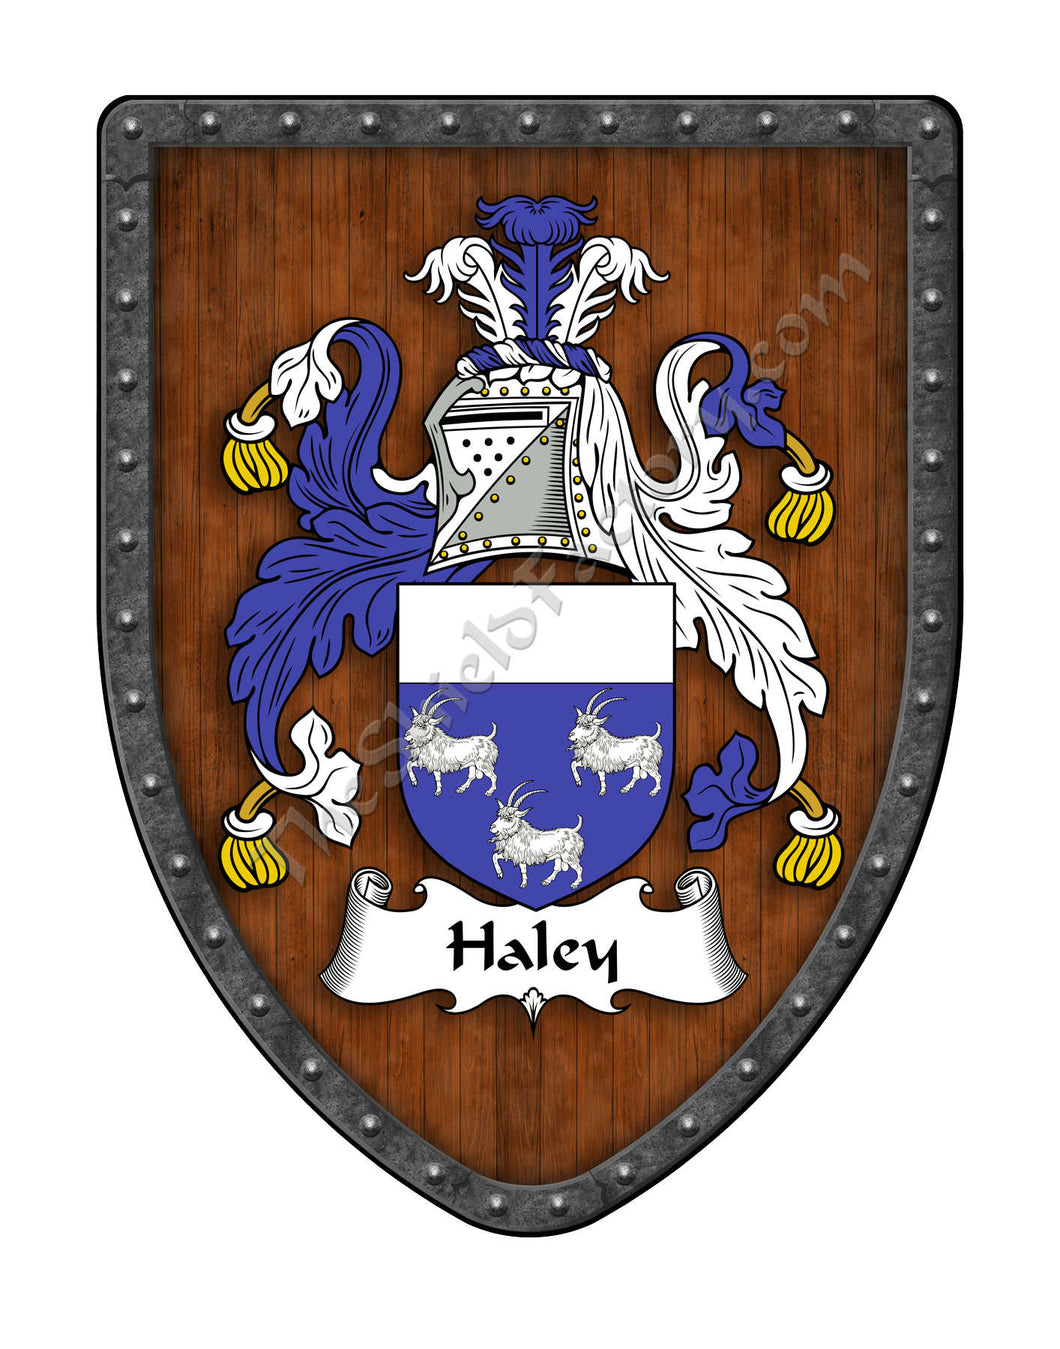 Haley Family Crest Coat of Arms